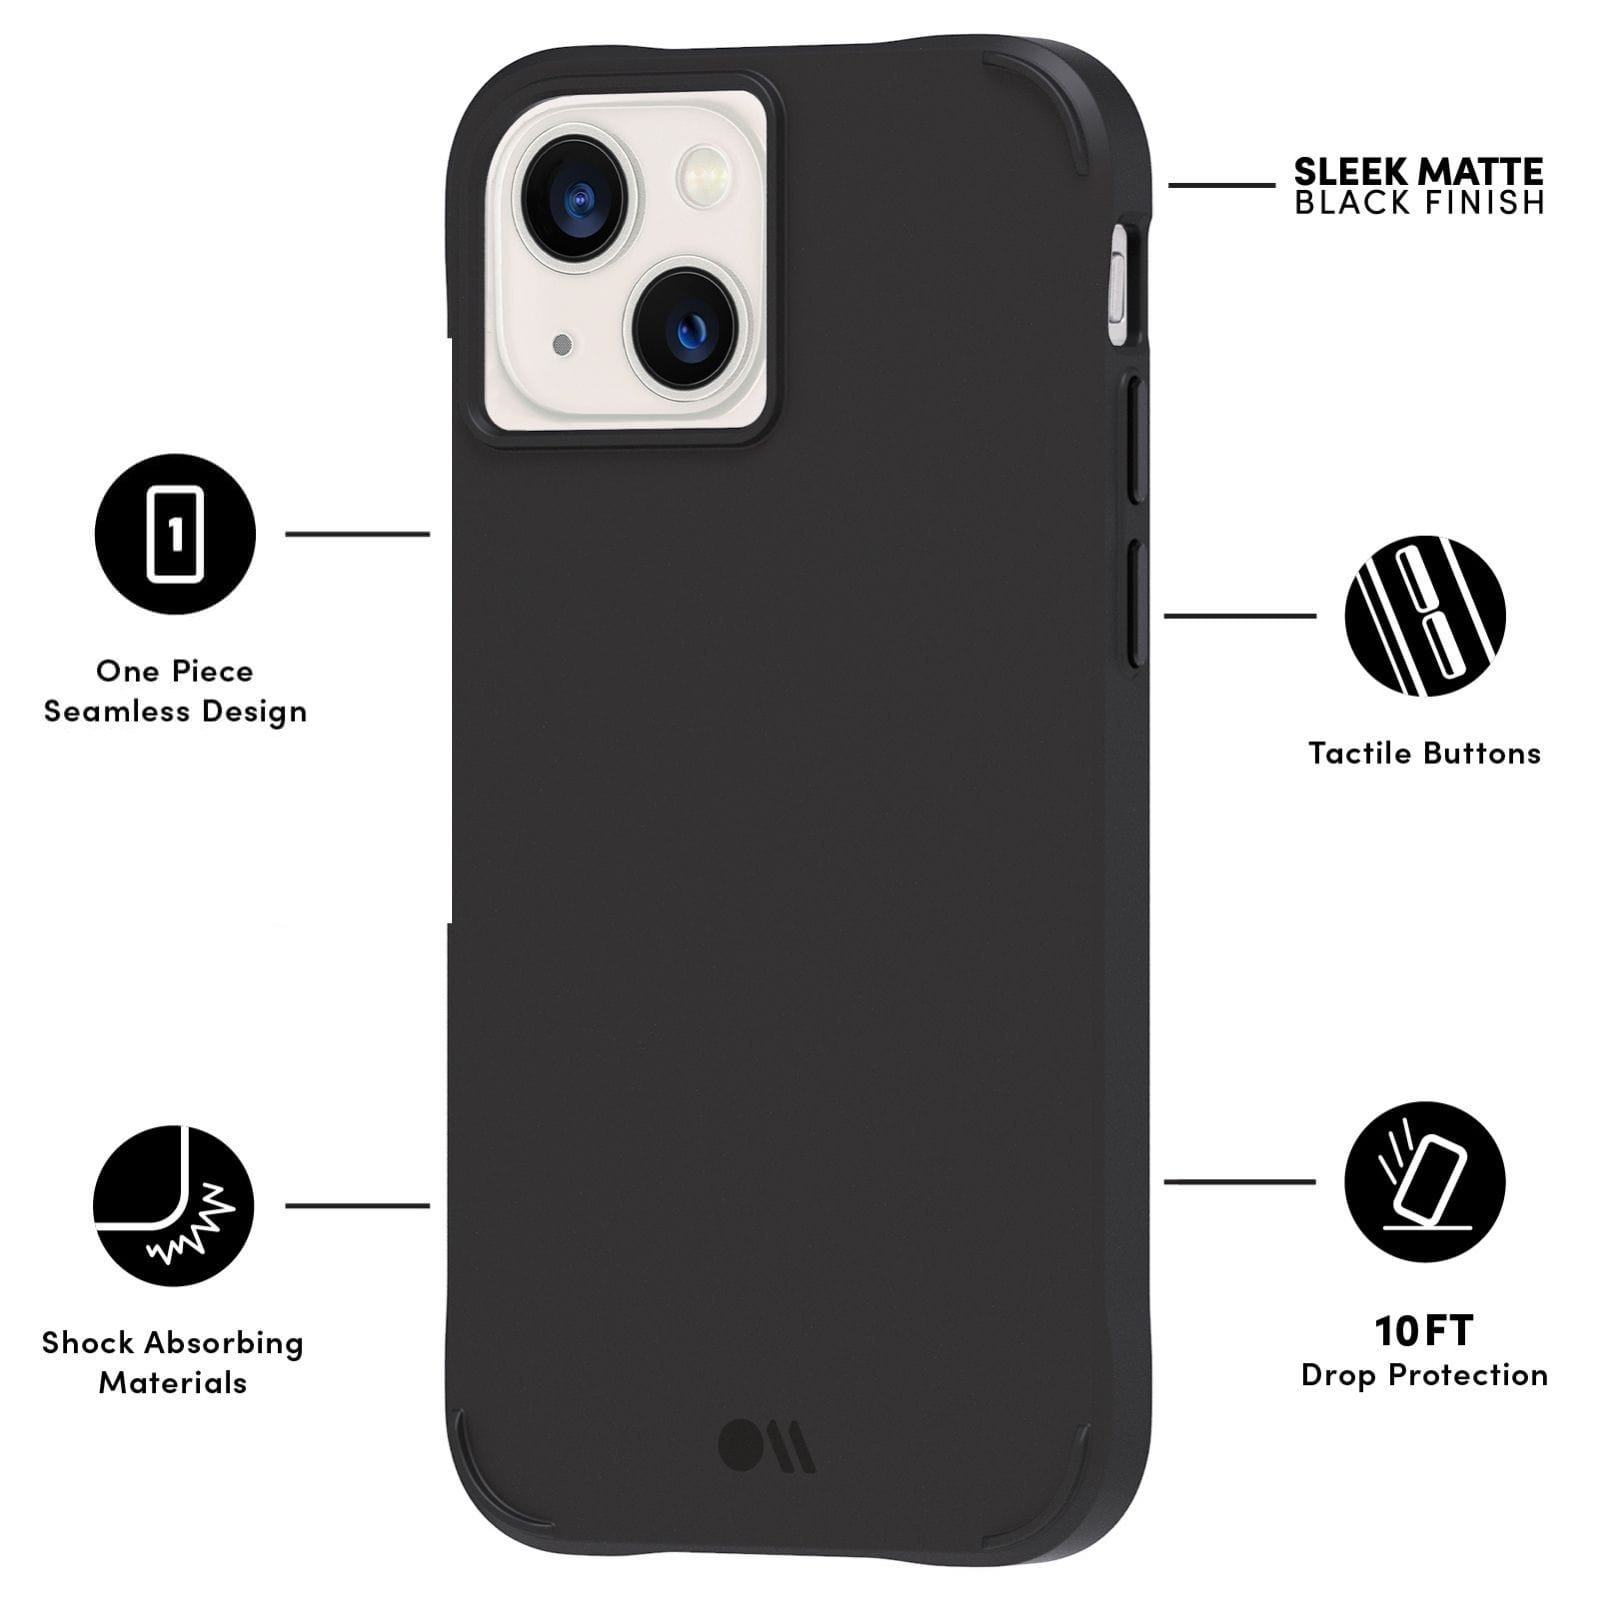 FEATURES: ONE PIECE SEAMLESS DESIGN, SHOCK ABSORBING MATERIALS, CRYSTAL CLEAR DESIGN, TACTILE BUTTONS, 10 FT DROP PROTECTION. COLOR::BLACK